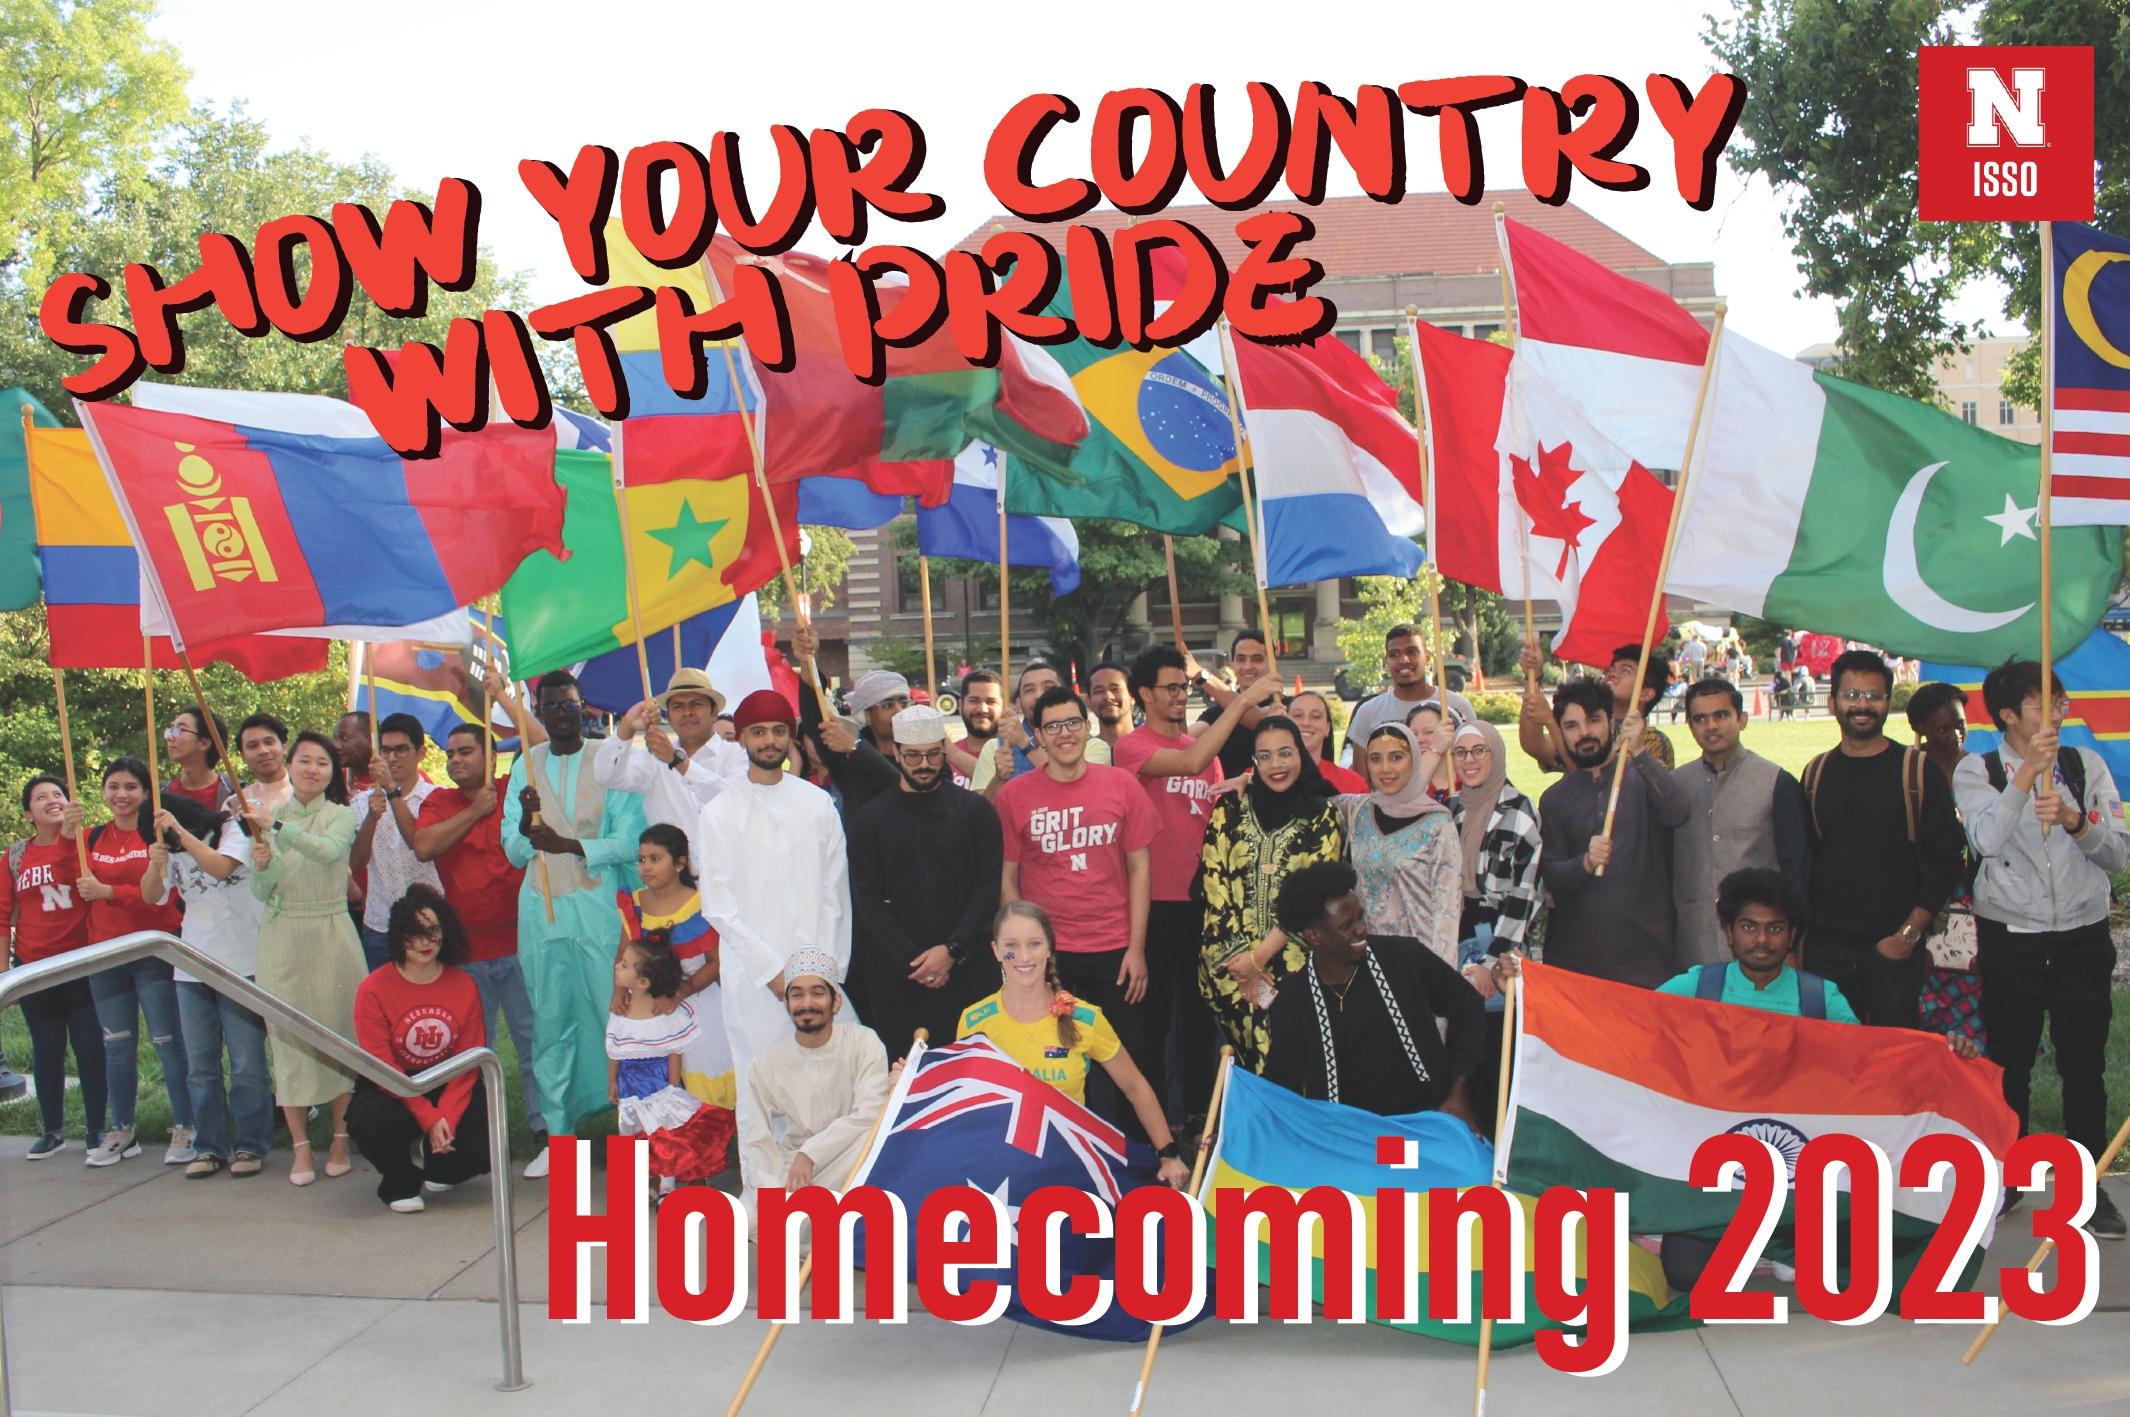 Show Your Country With Pride: HomeComing 2023